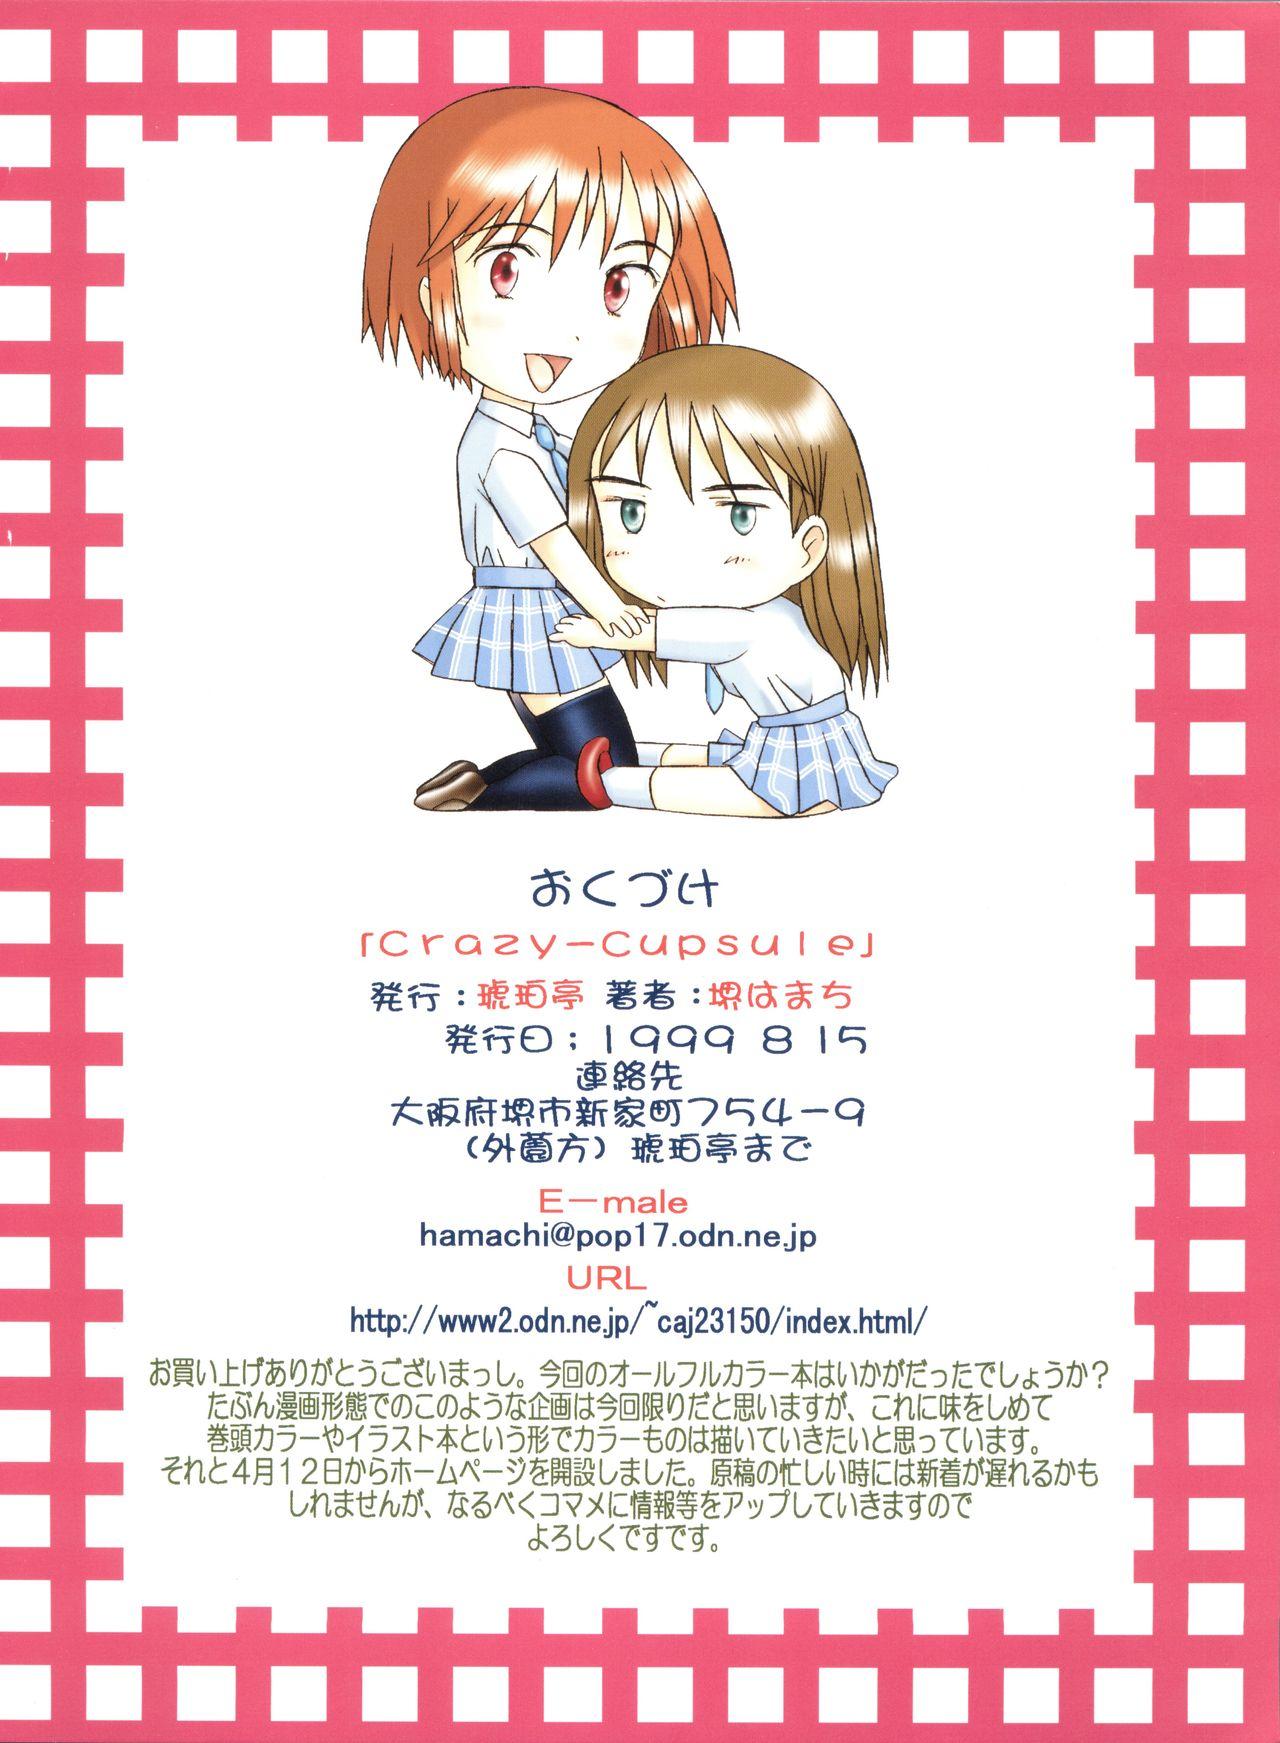 Massages Crazy Cupsule - Kare kano Baile - Page 33